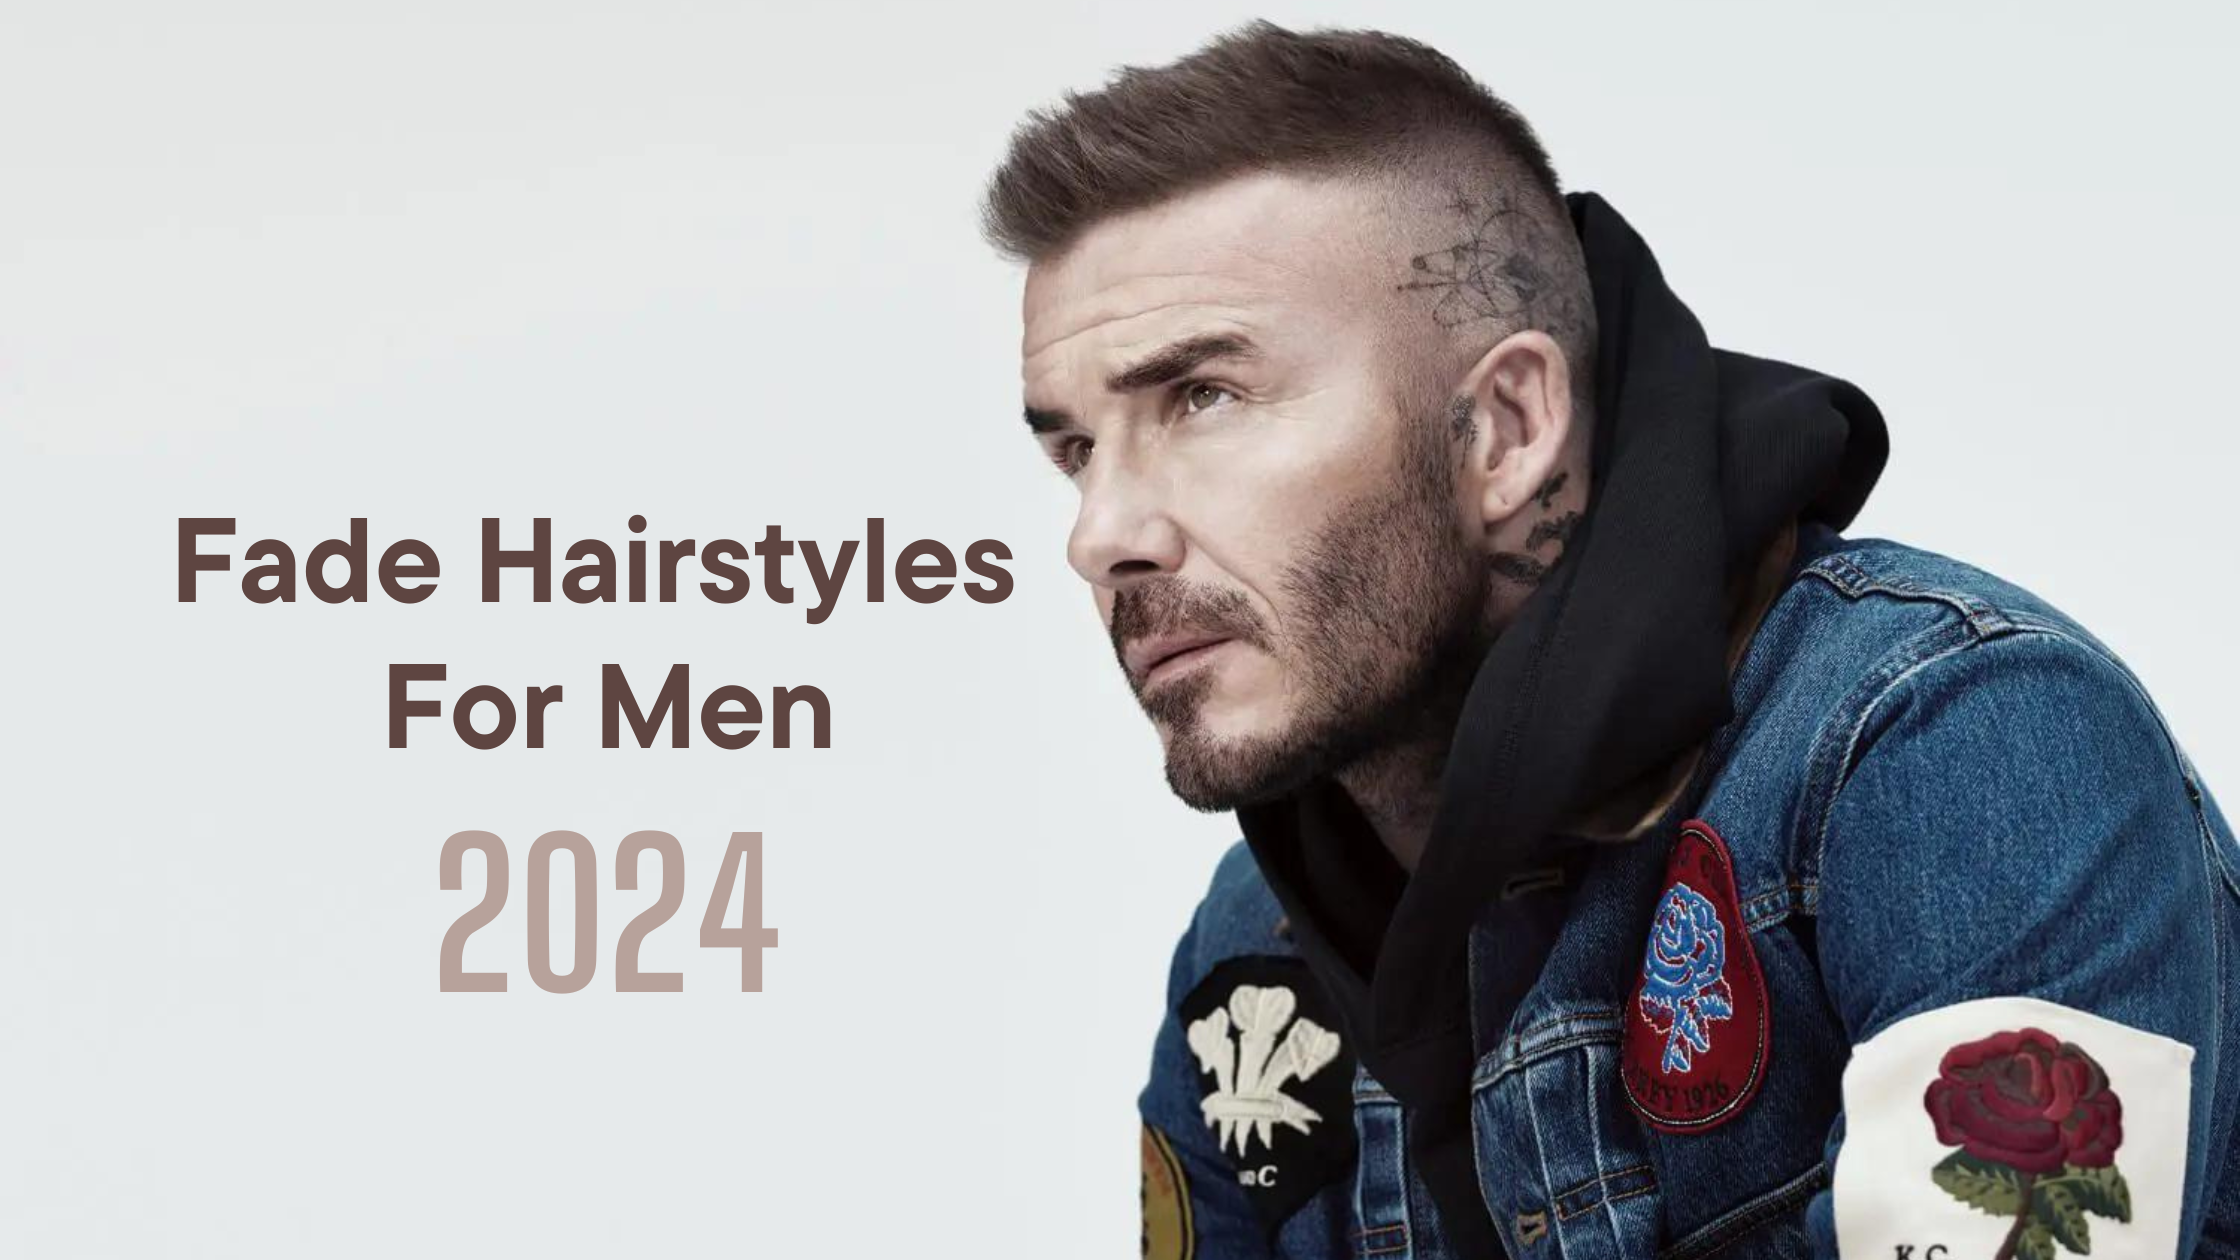 Twist Hairstyles Men: Instruction For 2024 - Mens Haircuts